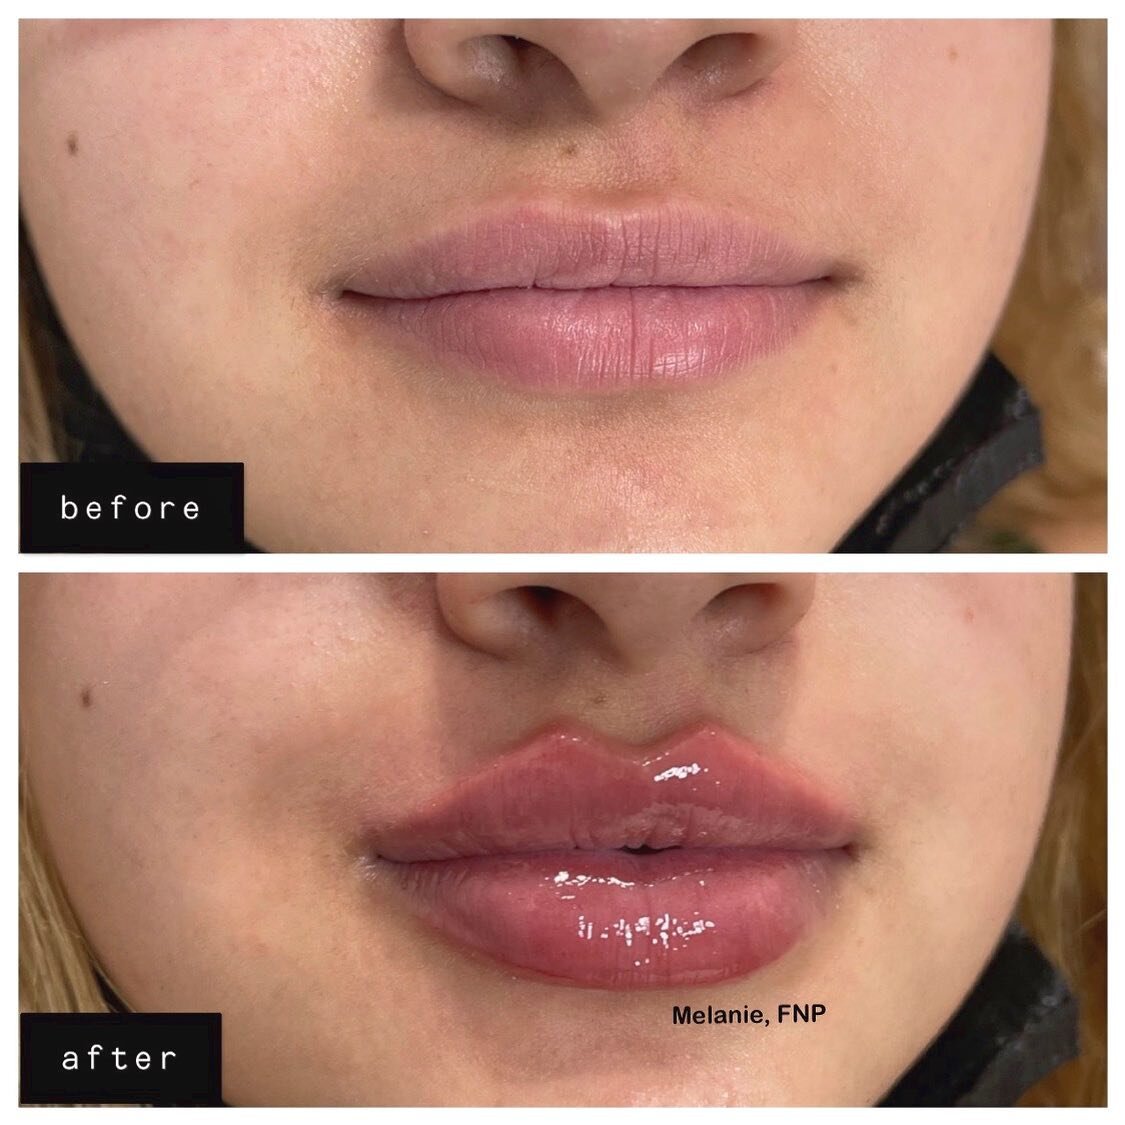 ✅RUSSIAN LIPS
✅BORDER REFINEMENT
✅KEYHOLE POUT

What do you guys think of these results?😻⬇️

#russianlips#Juvederm#Restylane#Voluma#Botox#Dysport#Kybella#aesthetics#dermalfiller#lipaugmentation#noseaugmentation#chinaugmentation#cheekenhancement#unde